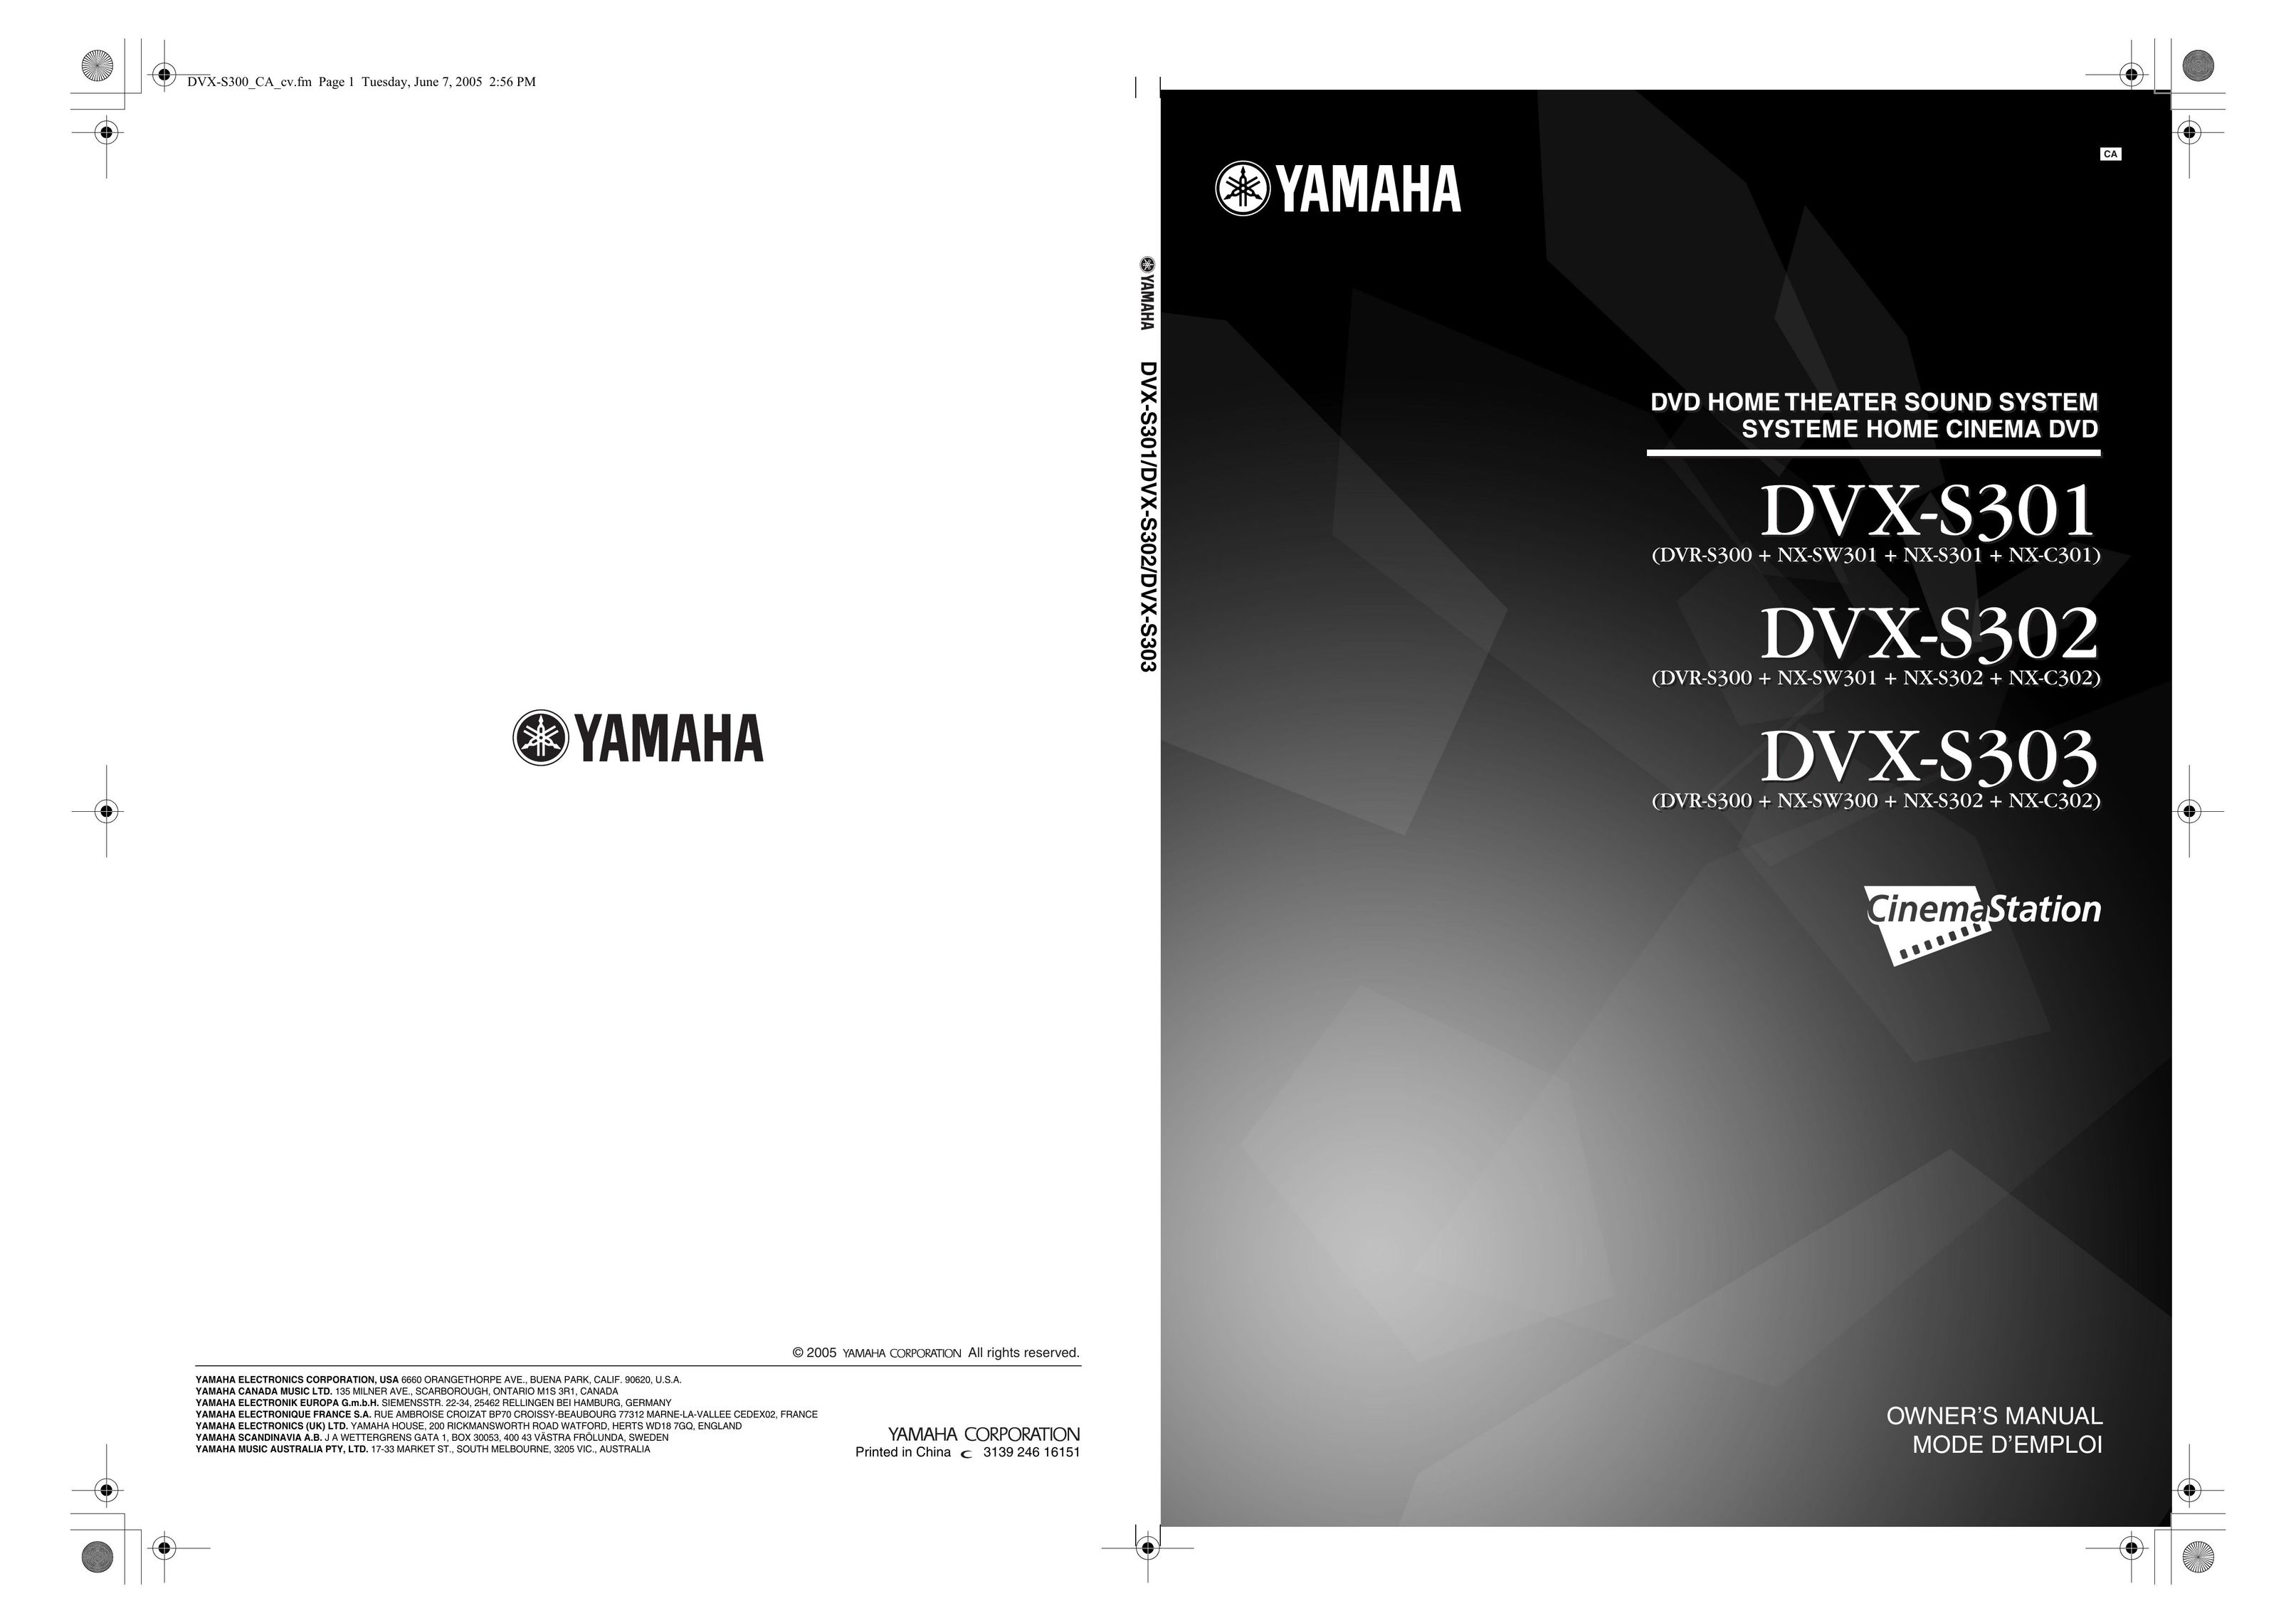 Yamaha DVX-S303 Home Theater System User Manual